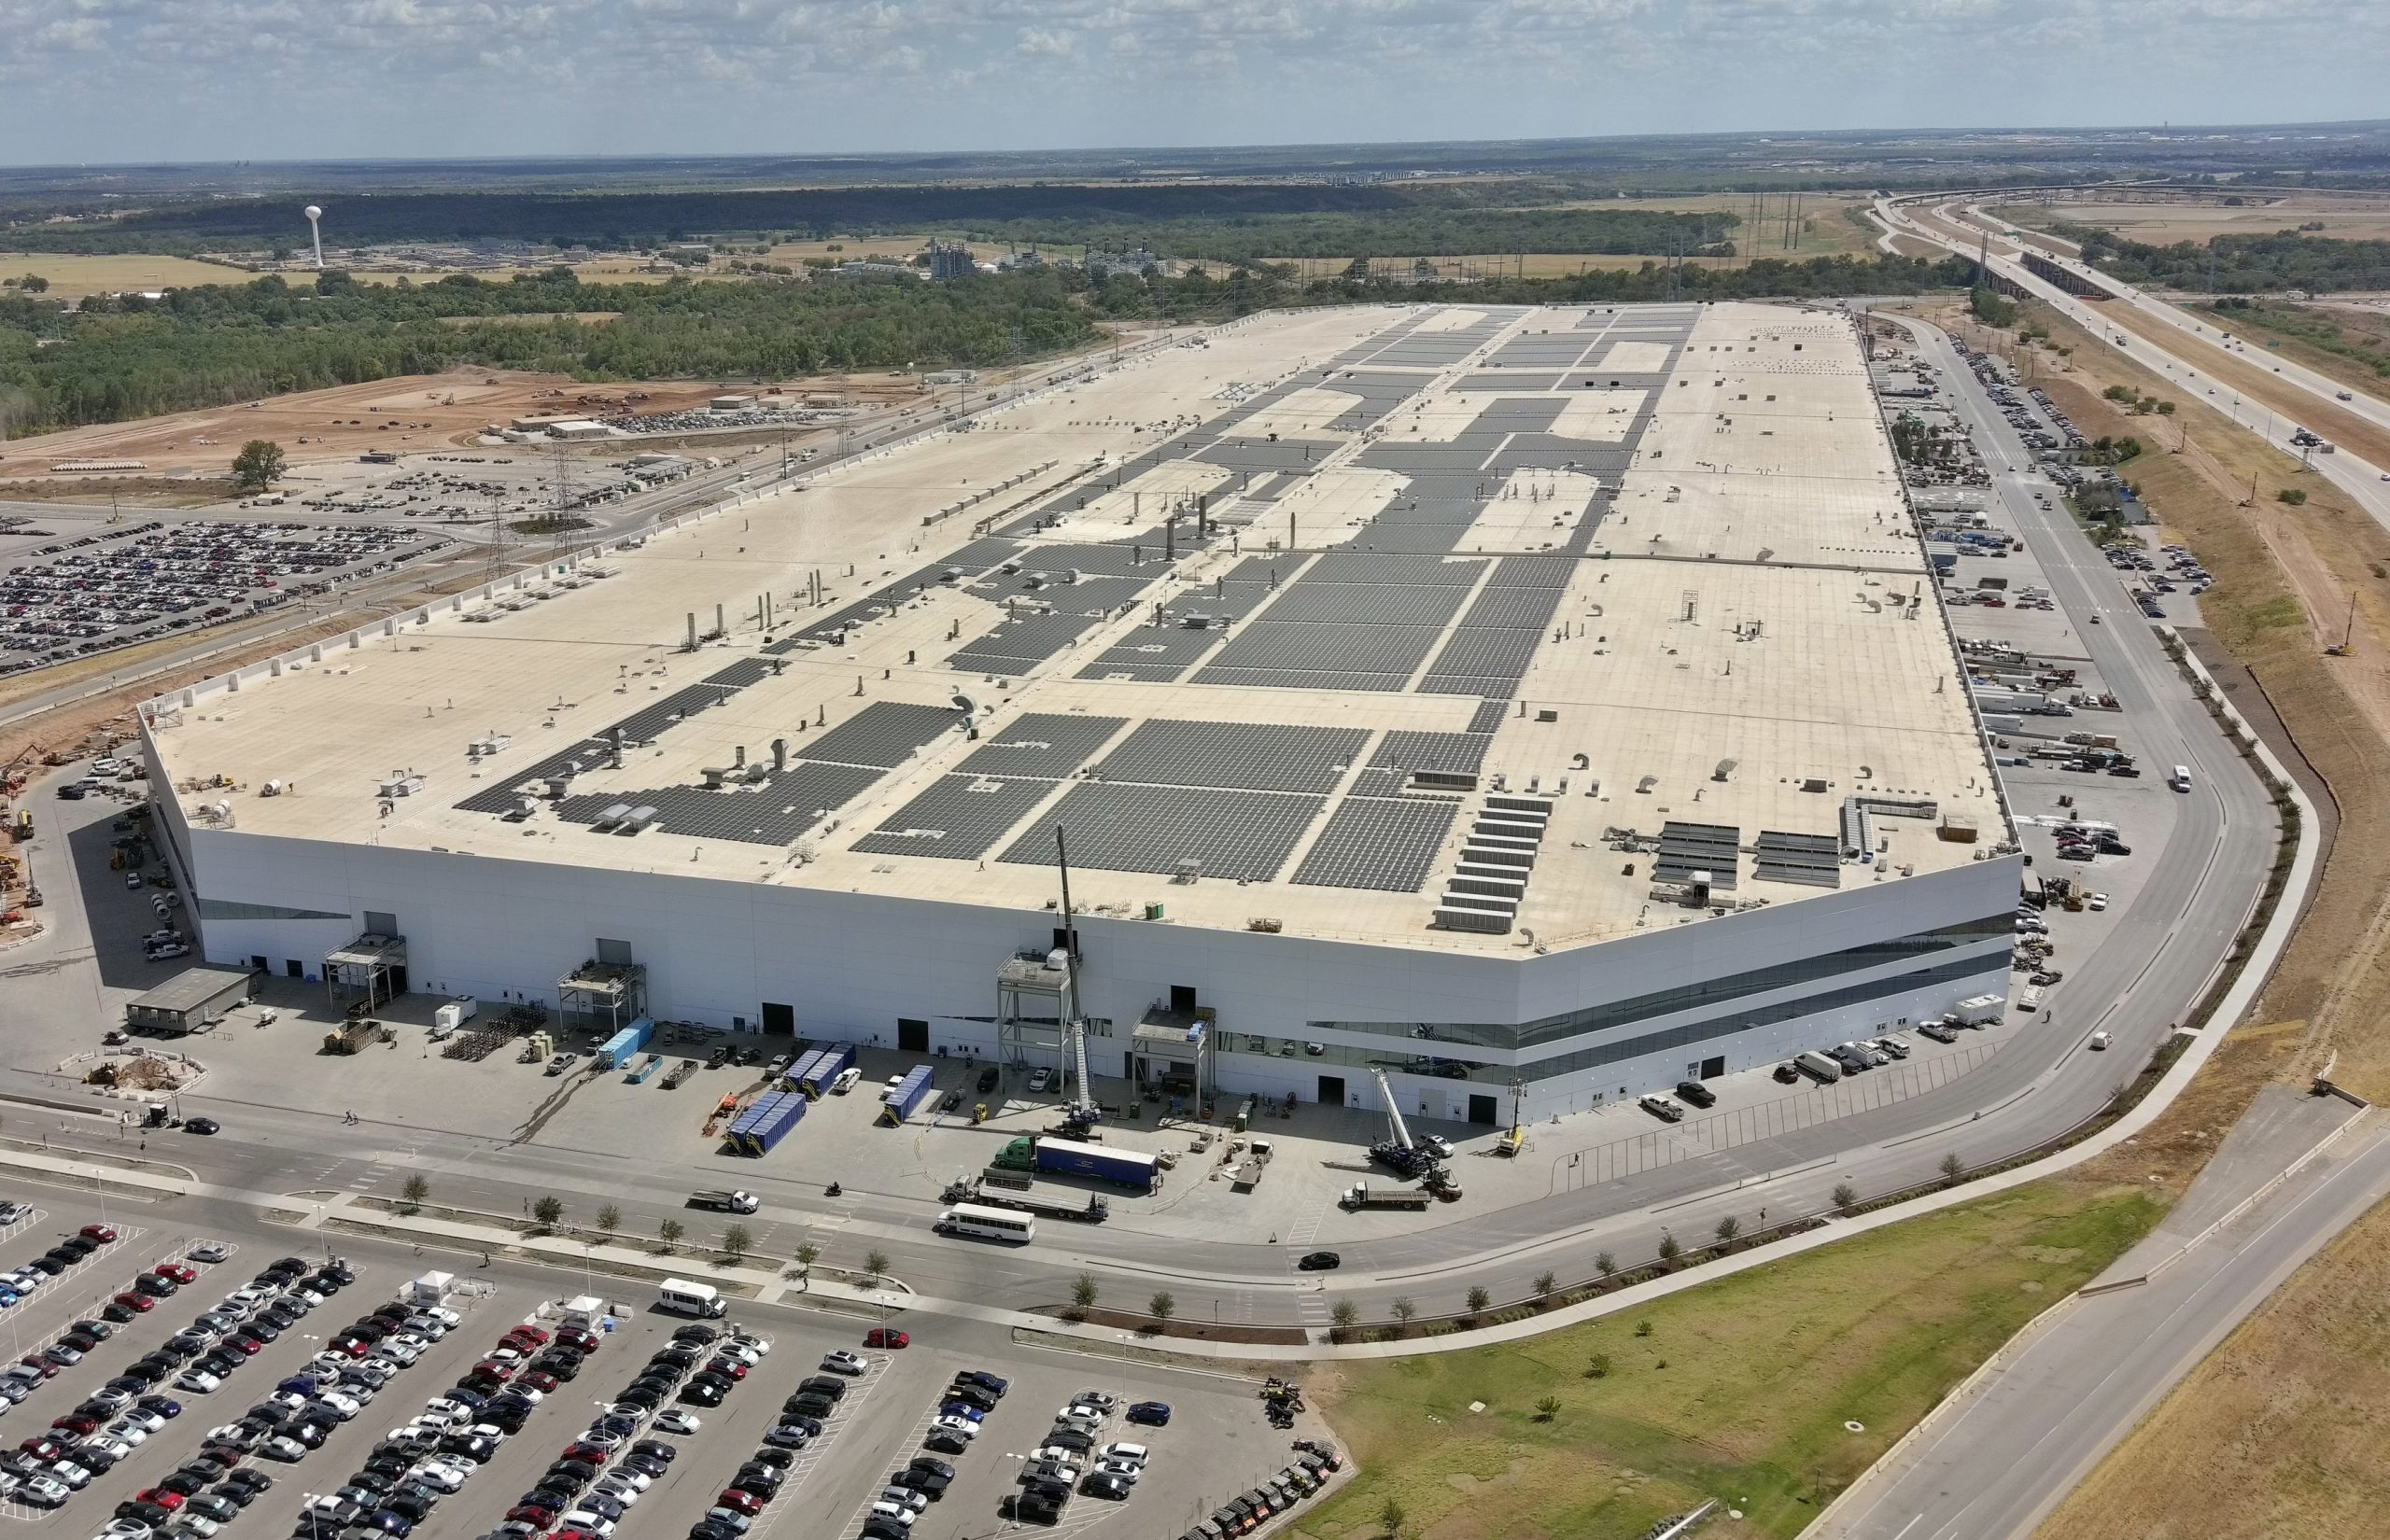 Tesla solar roof at Giga Texas to be world’s largest when complete